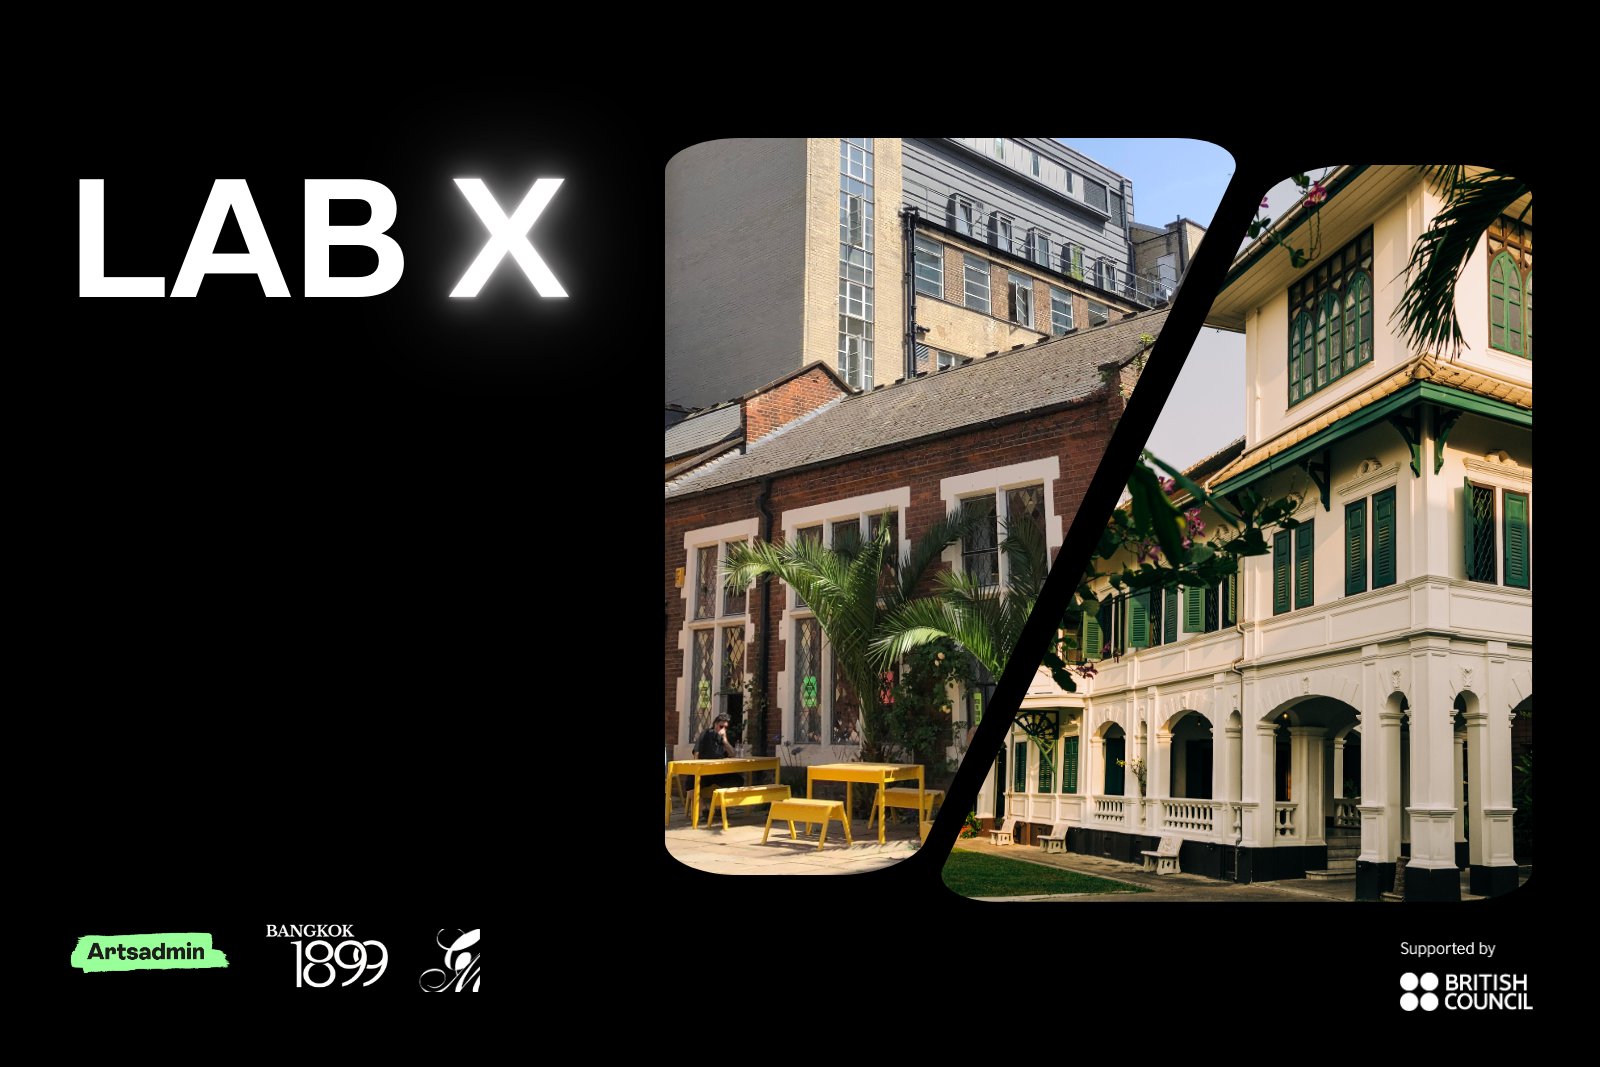 A black image with white text on the left-hand side which reads ‘LAB X’ - the ‘X’ is in neon white. On the right side there is a photographic collage, of two photos split in half diagonally with a small gap between them. he left-hand-side photo is the exterior of Toynbee Studios in the daytime – an old building in London with yellow tables and benches. The photo on the right is the exterior of Bangkok 1899, a grand white and green building in the daytime. Below there are logos for Artsadmin, Bangkok 1899, Creative Migration and the British Council